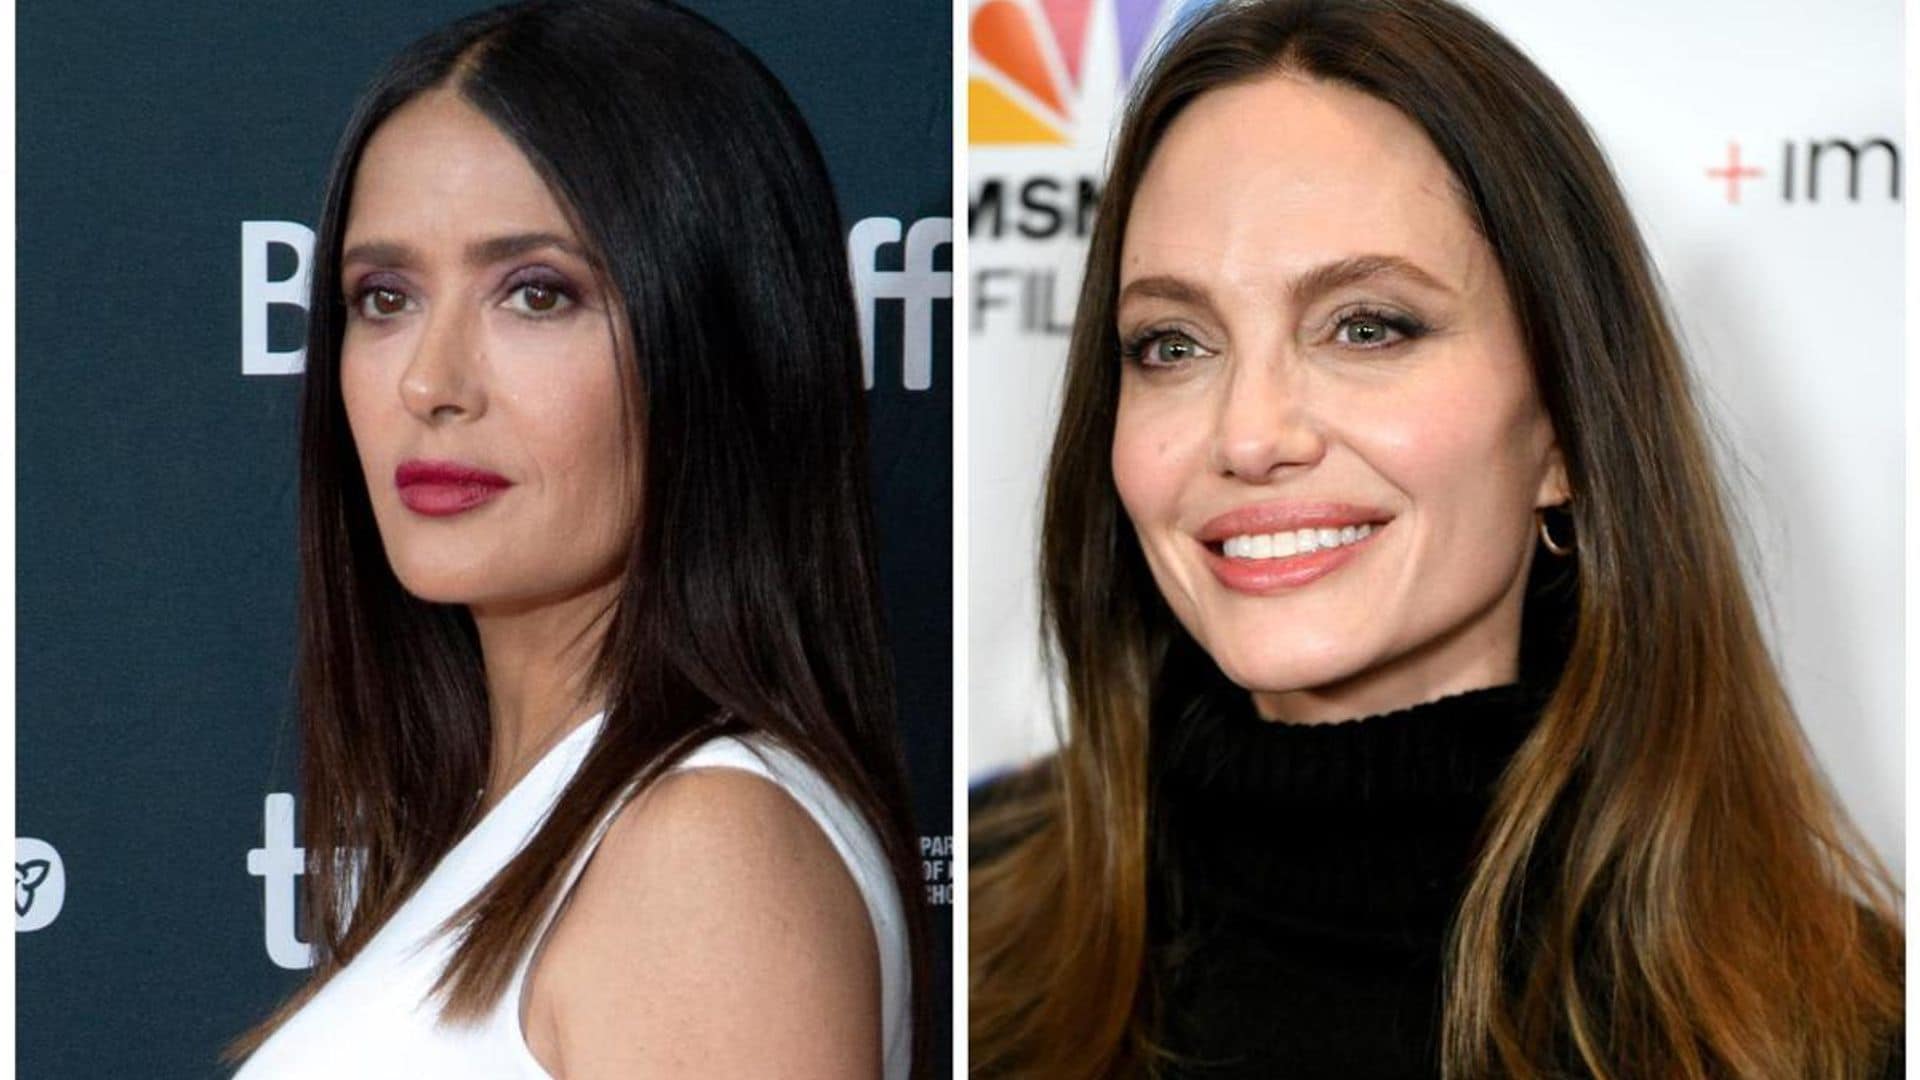 Salma Hayek is playing matchmaker for Angelina Jolie: Report